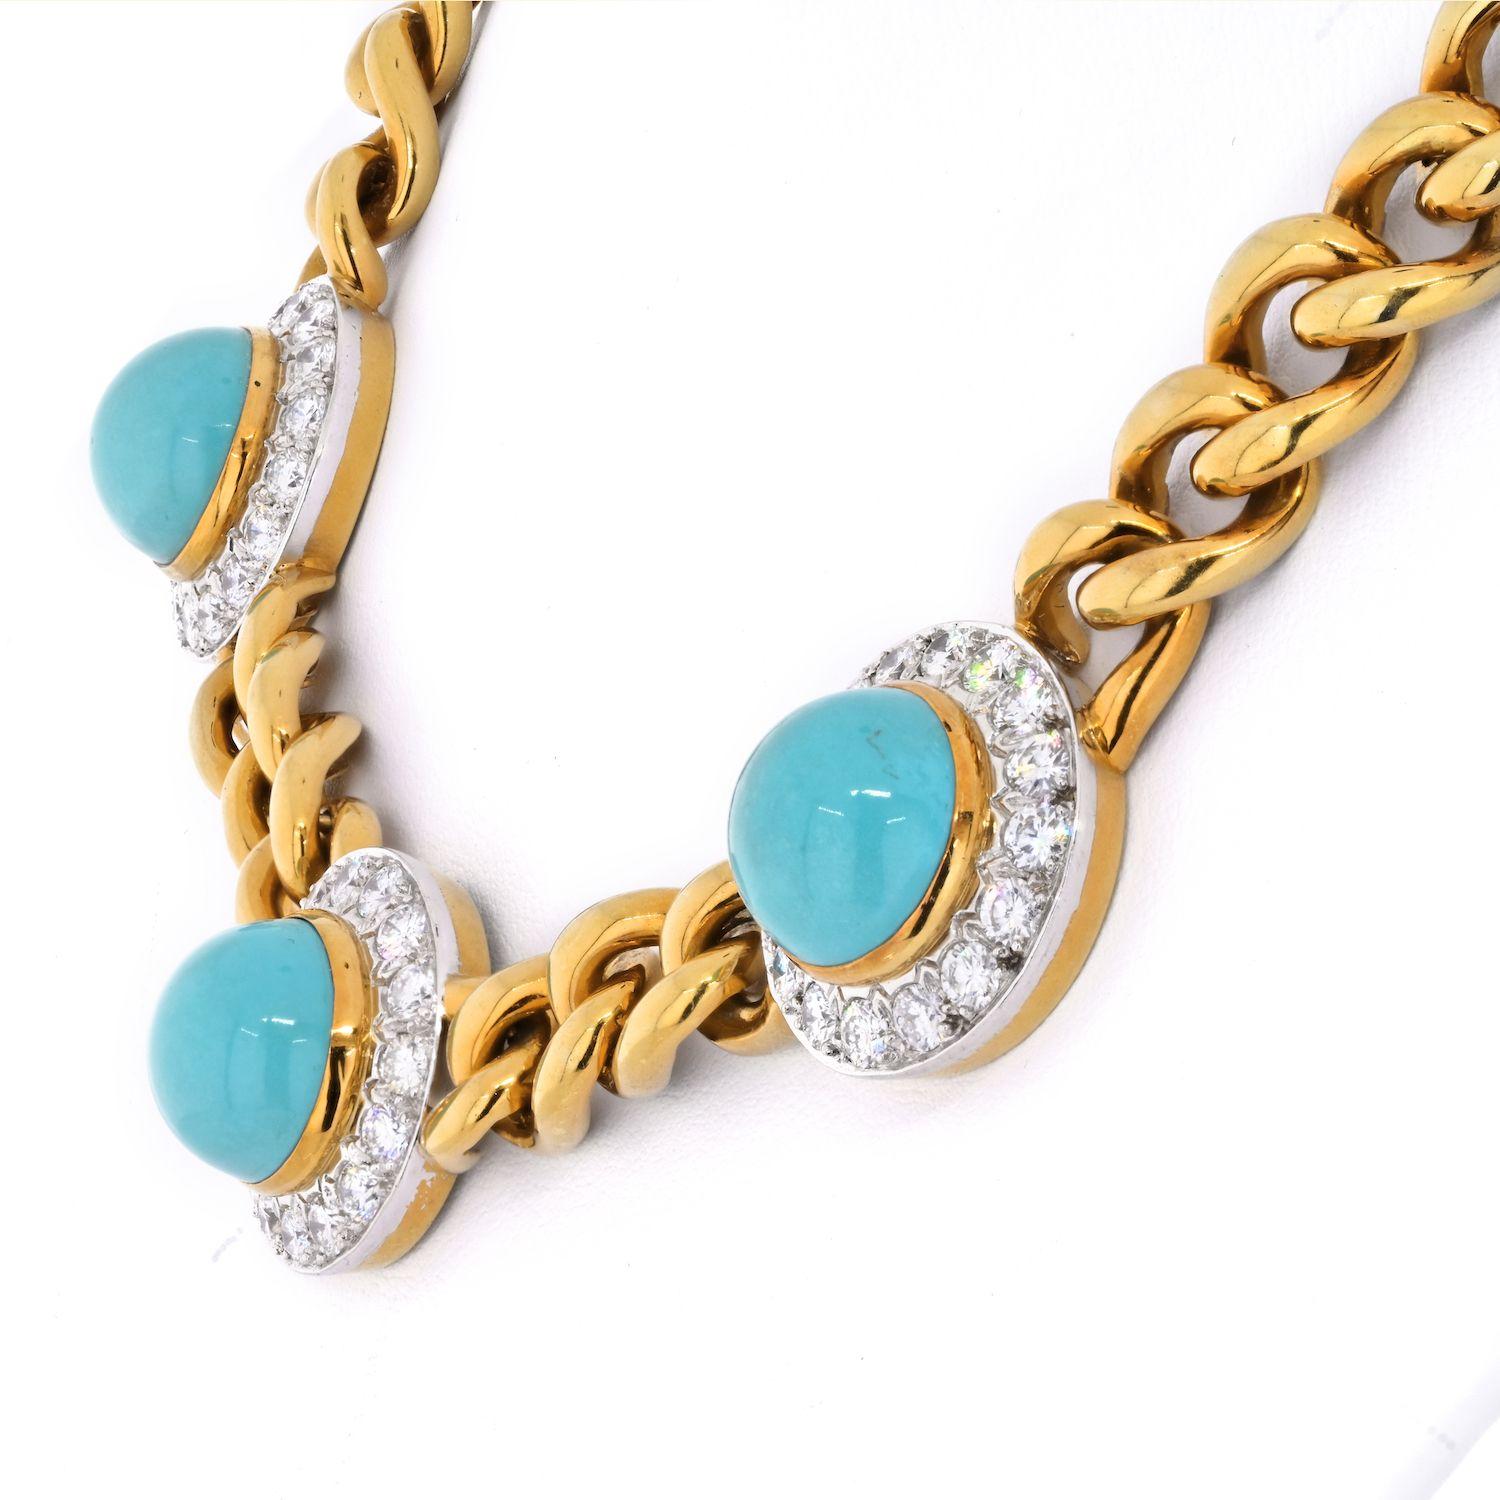 This is a lovely turquoise and diamond necklace made in 18k yellow gold. Featuring three cabochon turquoise stations each surrounded by round diamonds, completed by a curb link chain.
Diamonds weighing a total of approximately 5.75 carats
Length